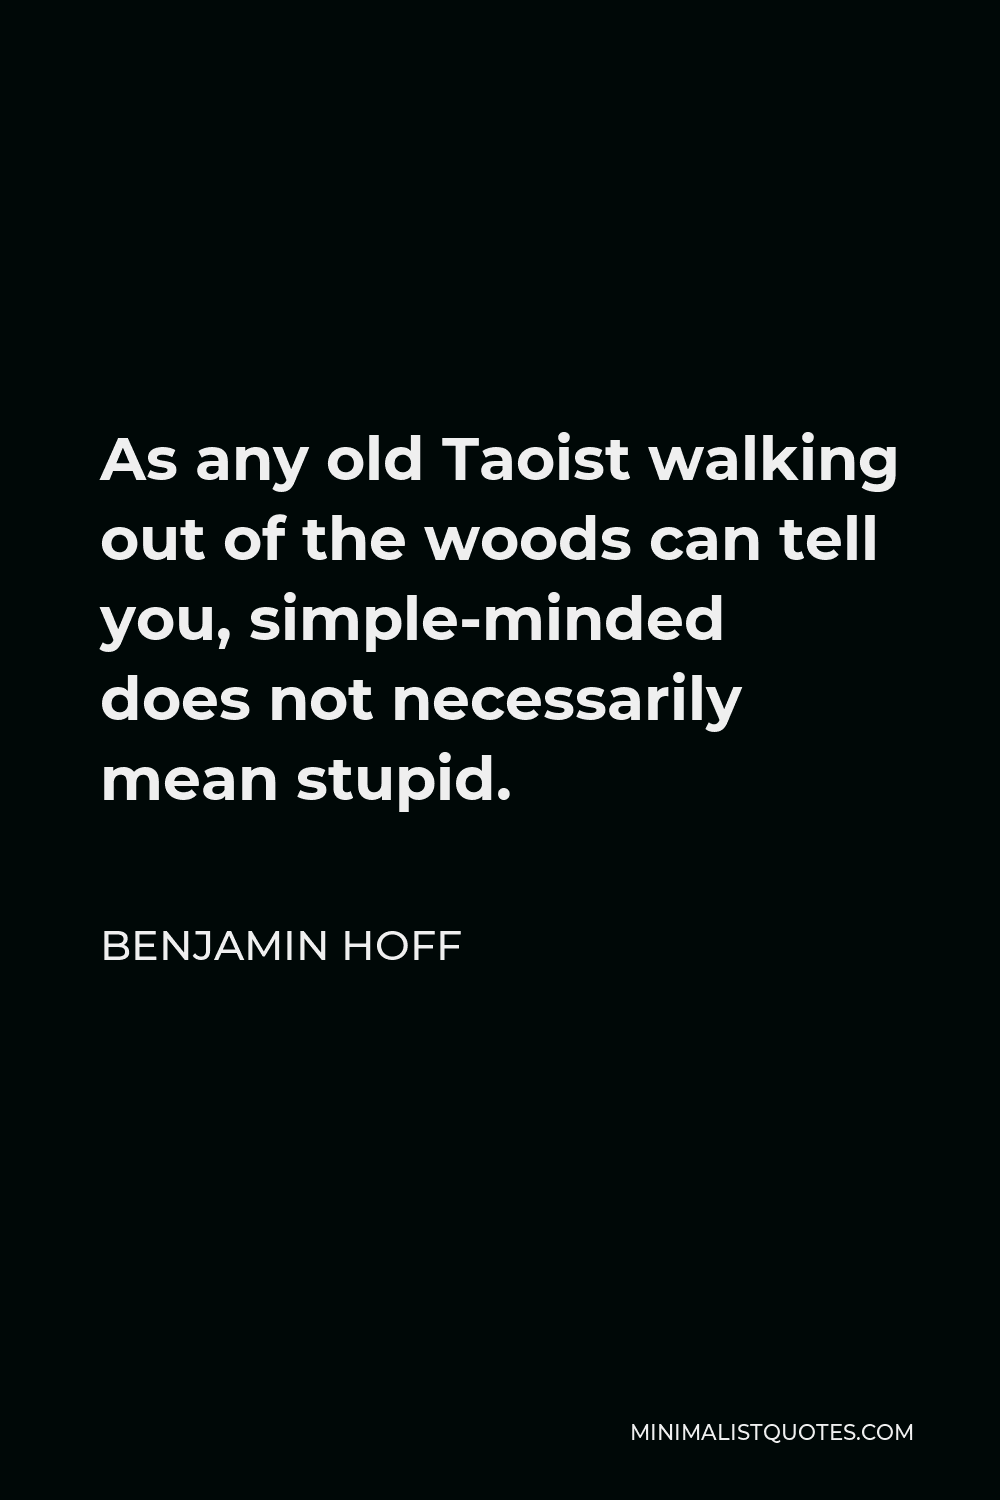 Benjamin Hoff Quote - As any old Taoist walking out of the woods can tell you, simple-minded does not necessarily mean stupid.